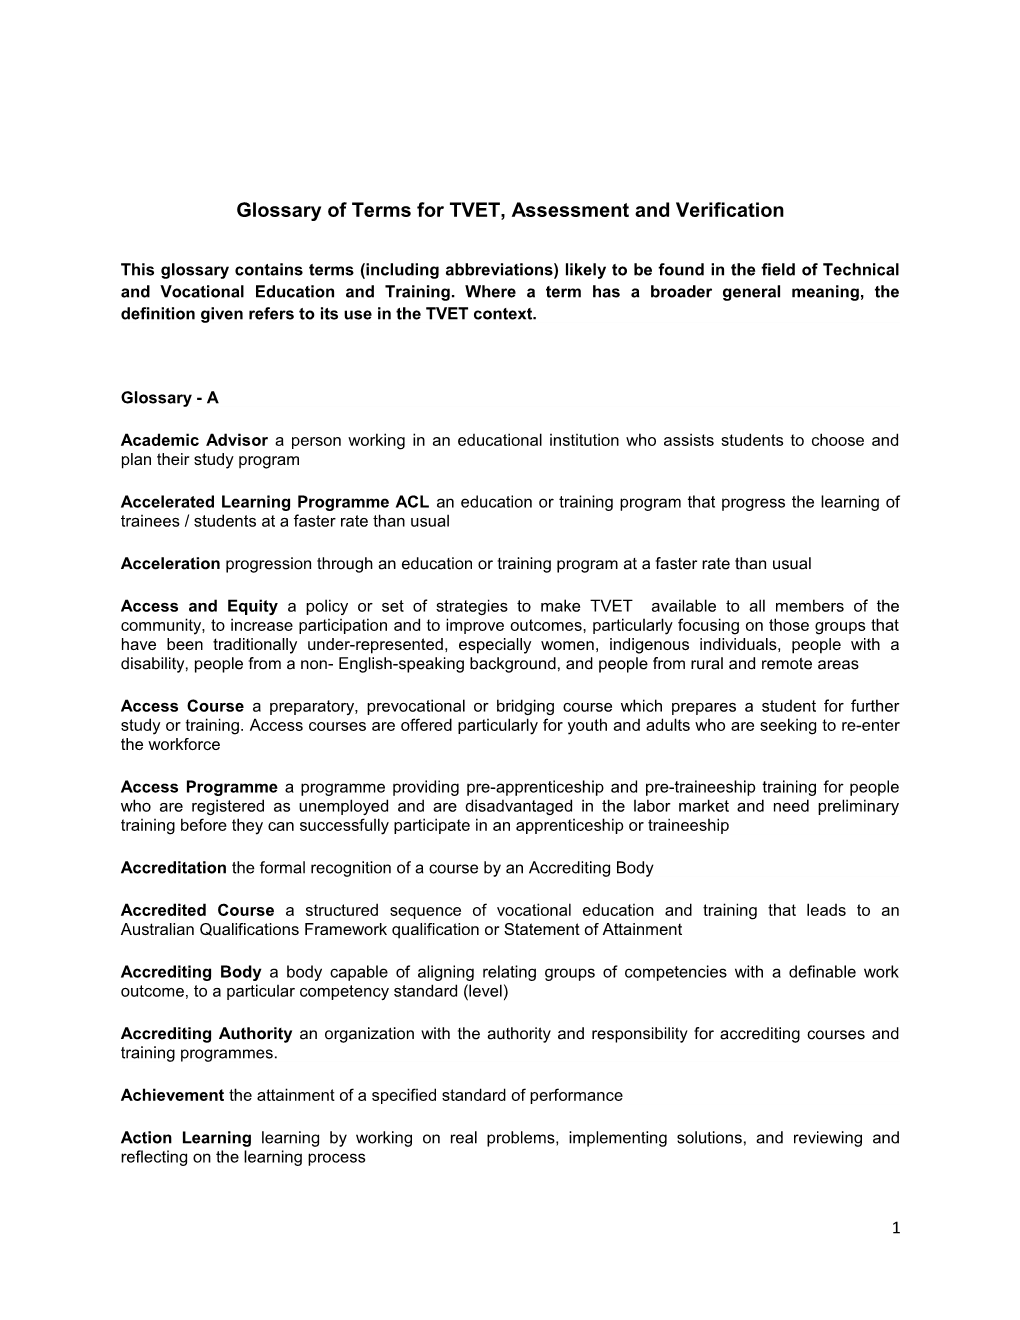 Glossary of Terms for TVET, Assessment and Verification